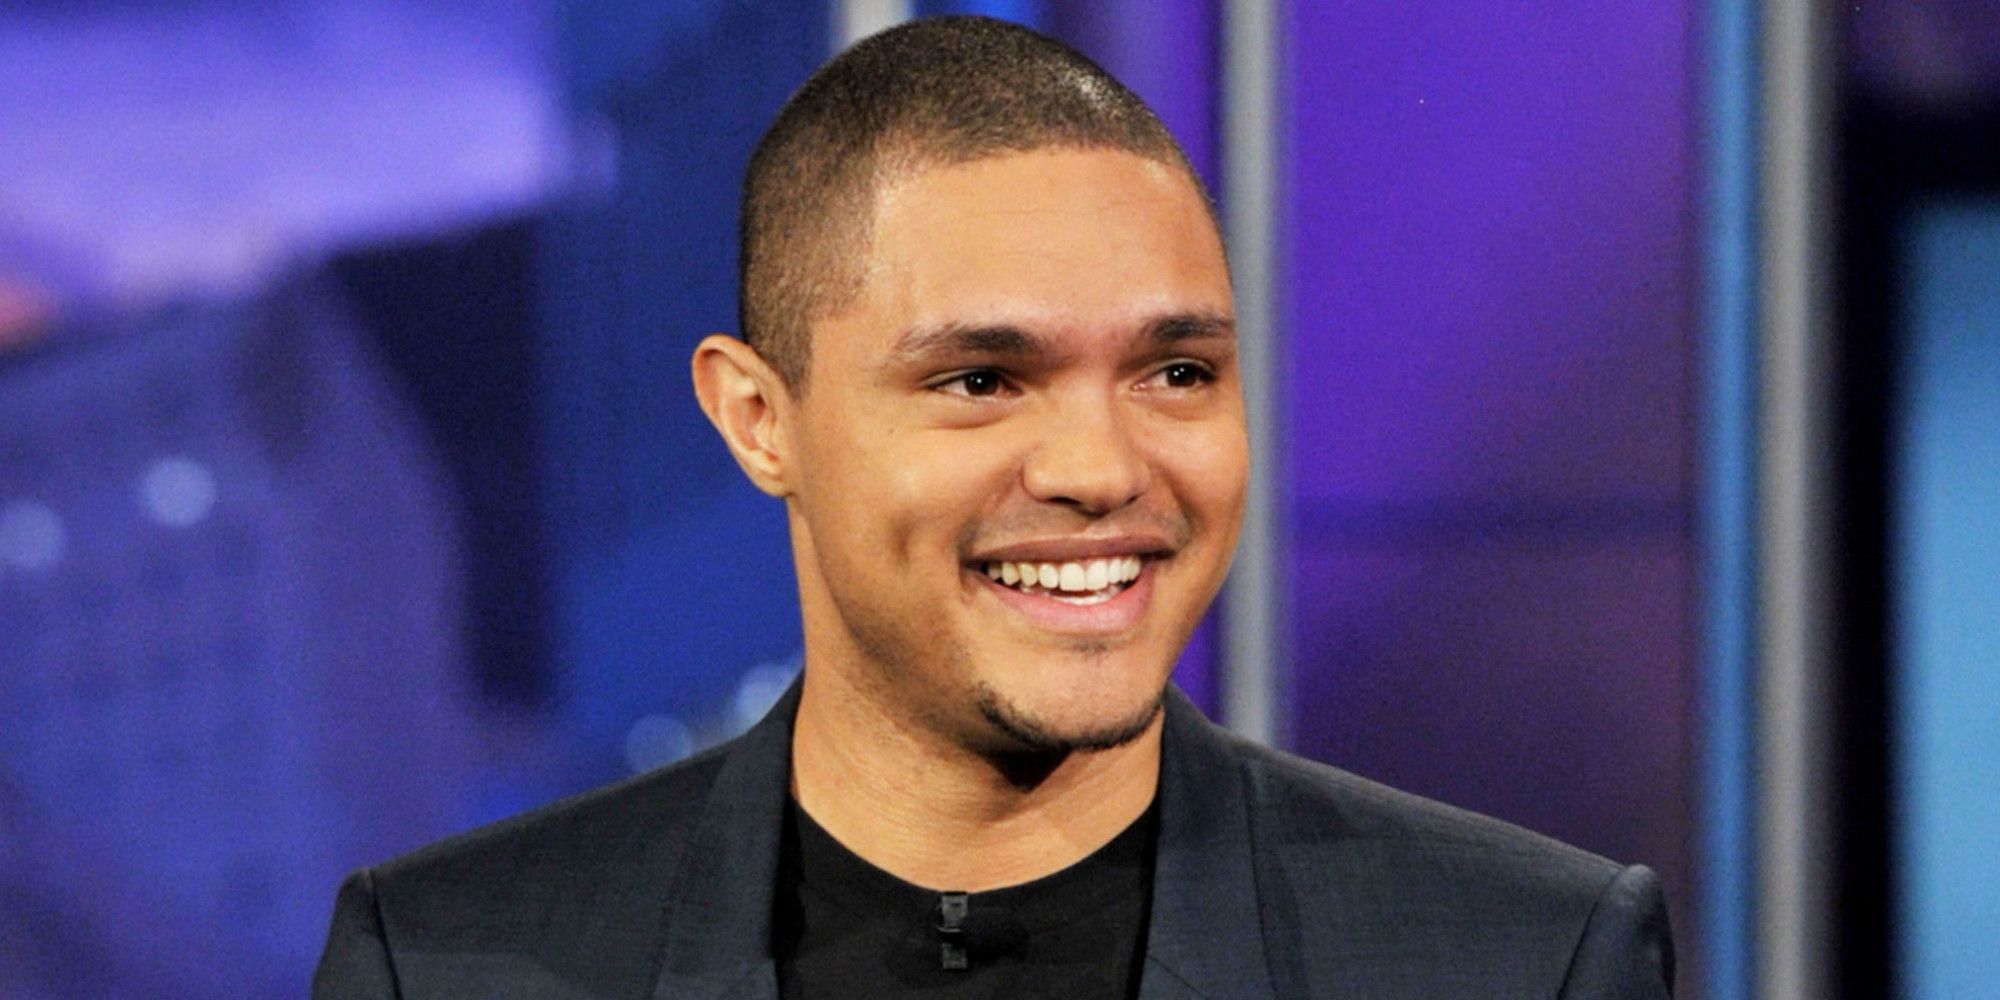 BURBANK, CA - JANUARY 06: Comedian Trevor Noah performs on the Tonight Show With Jay Leno at NBC Studios on January 6, 2012 in Burbank, California. (Photo by Kevin Winter/NBCUniversal/Getty Images)